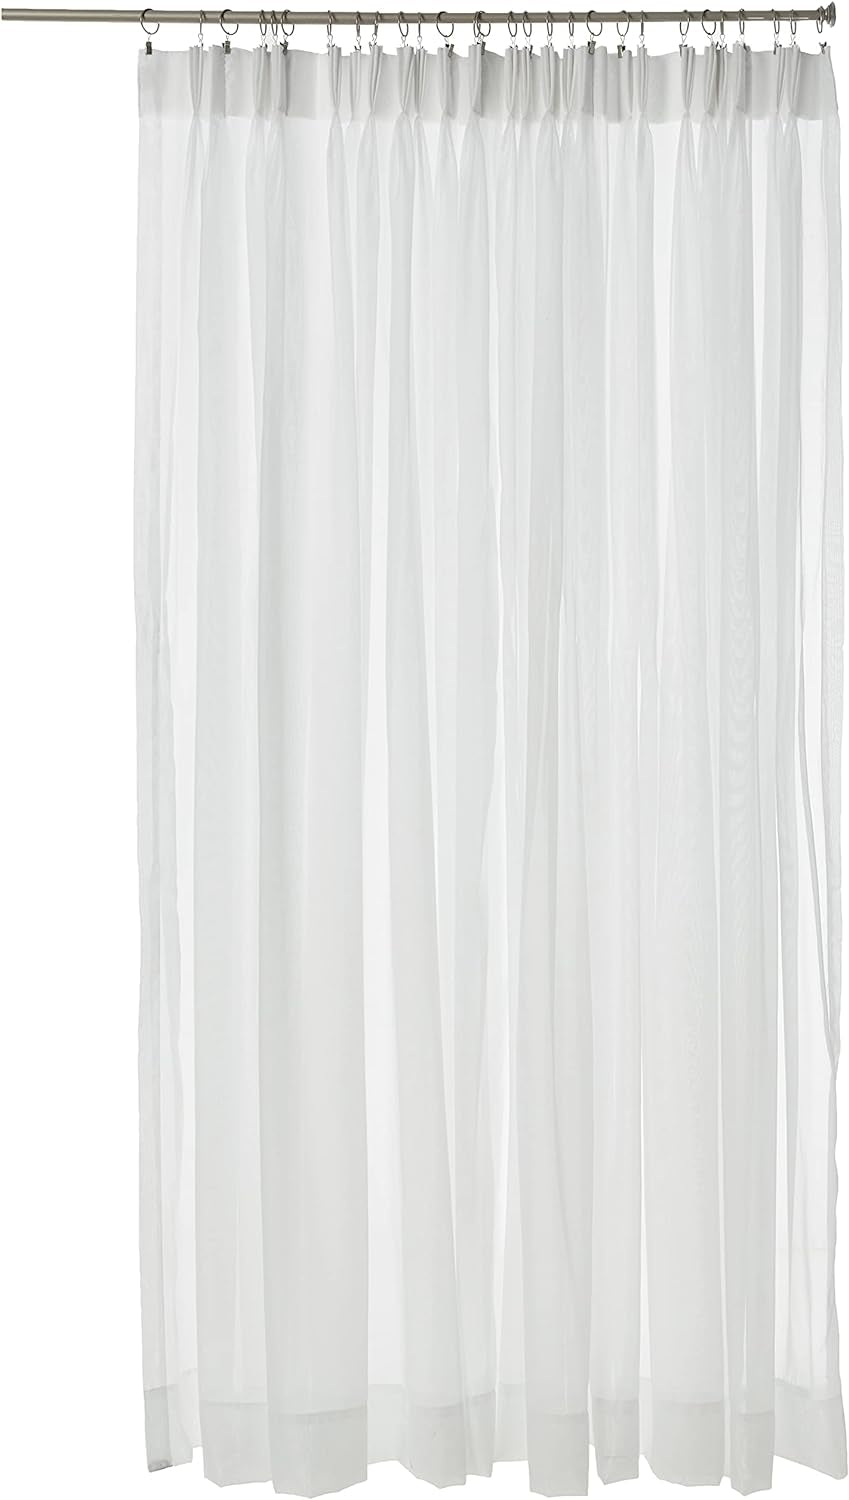 Stylemaster Splendor Pinch Pleated Drapes Pair, 2 of 60" by 84", White  Stylemaster Home Products White 96 In X 84 In | Patio Panel 